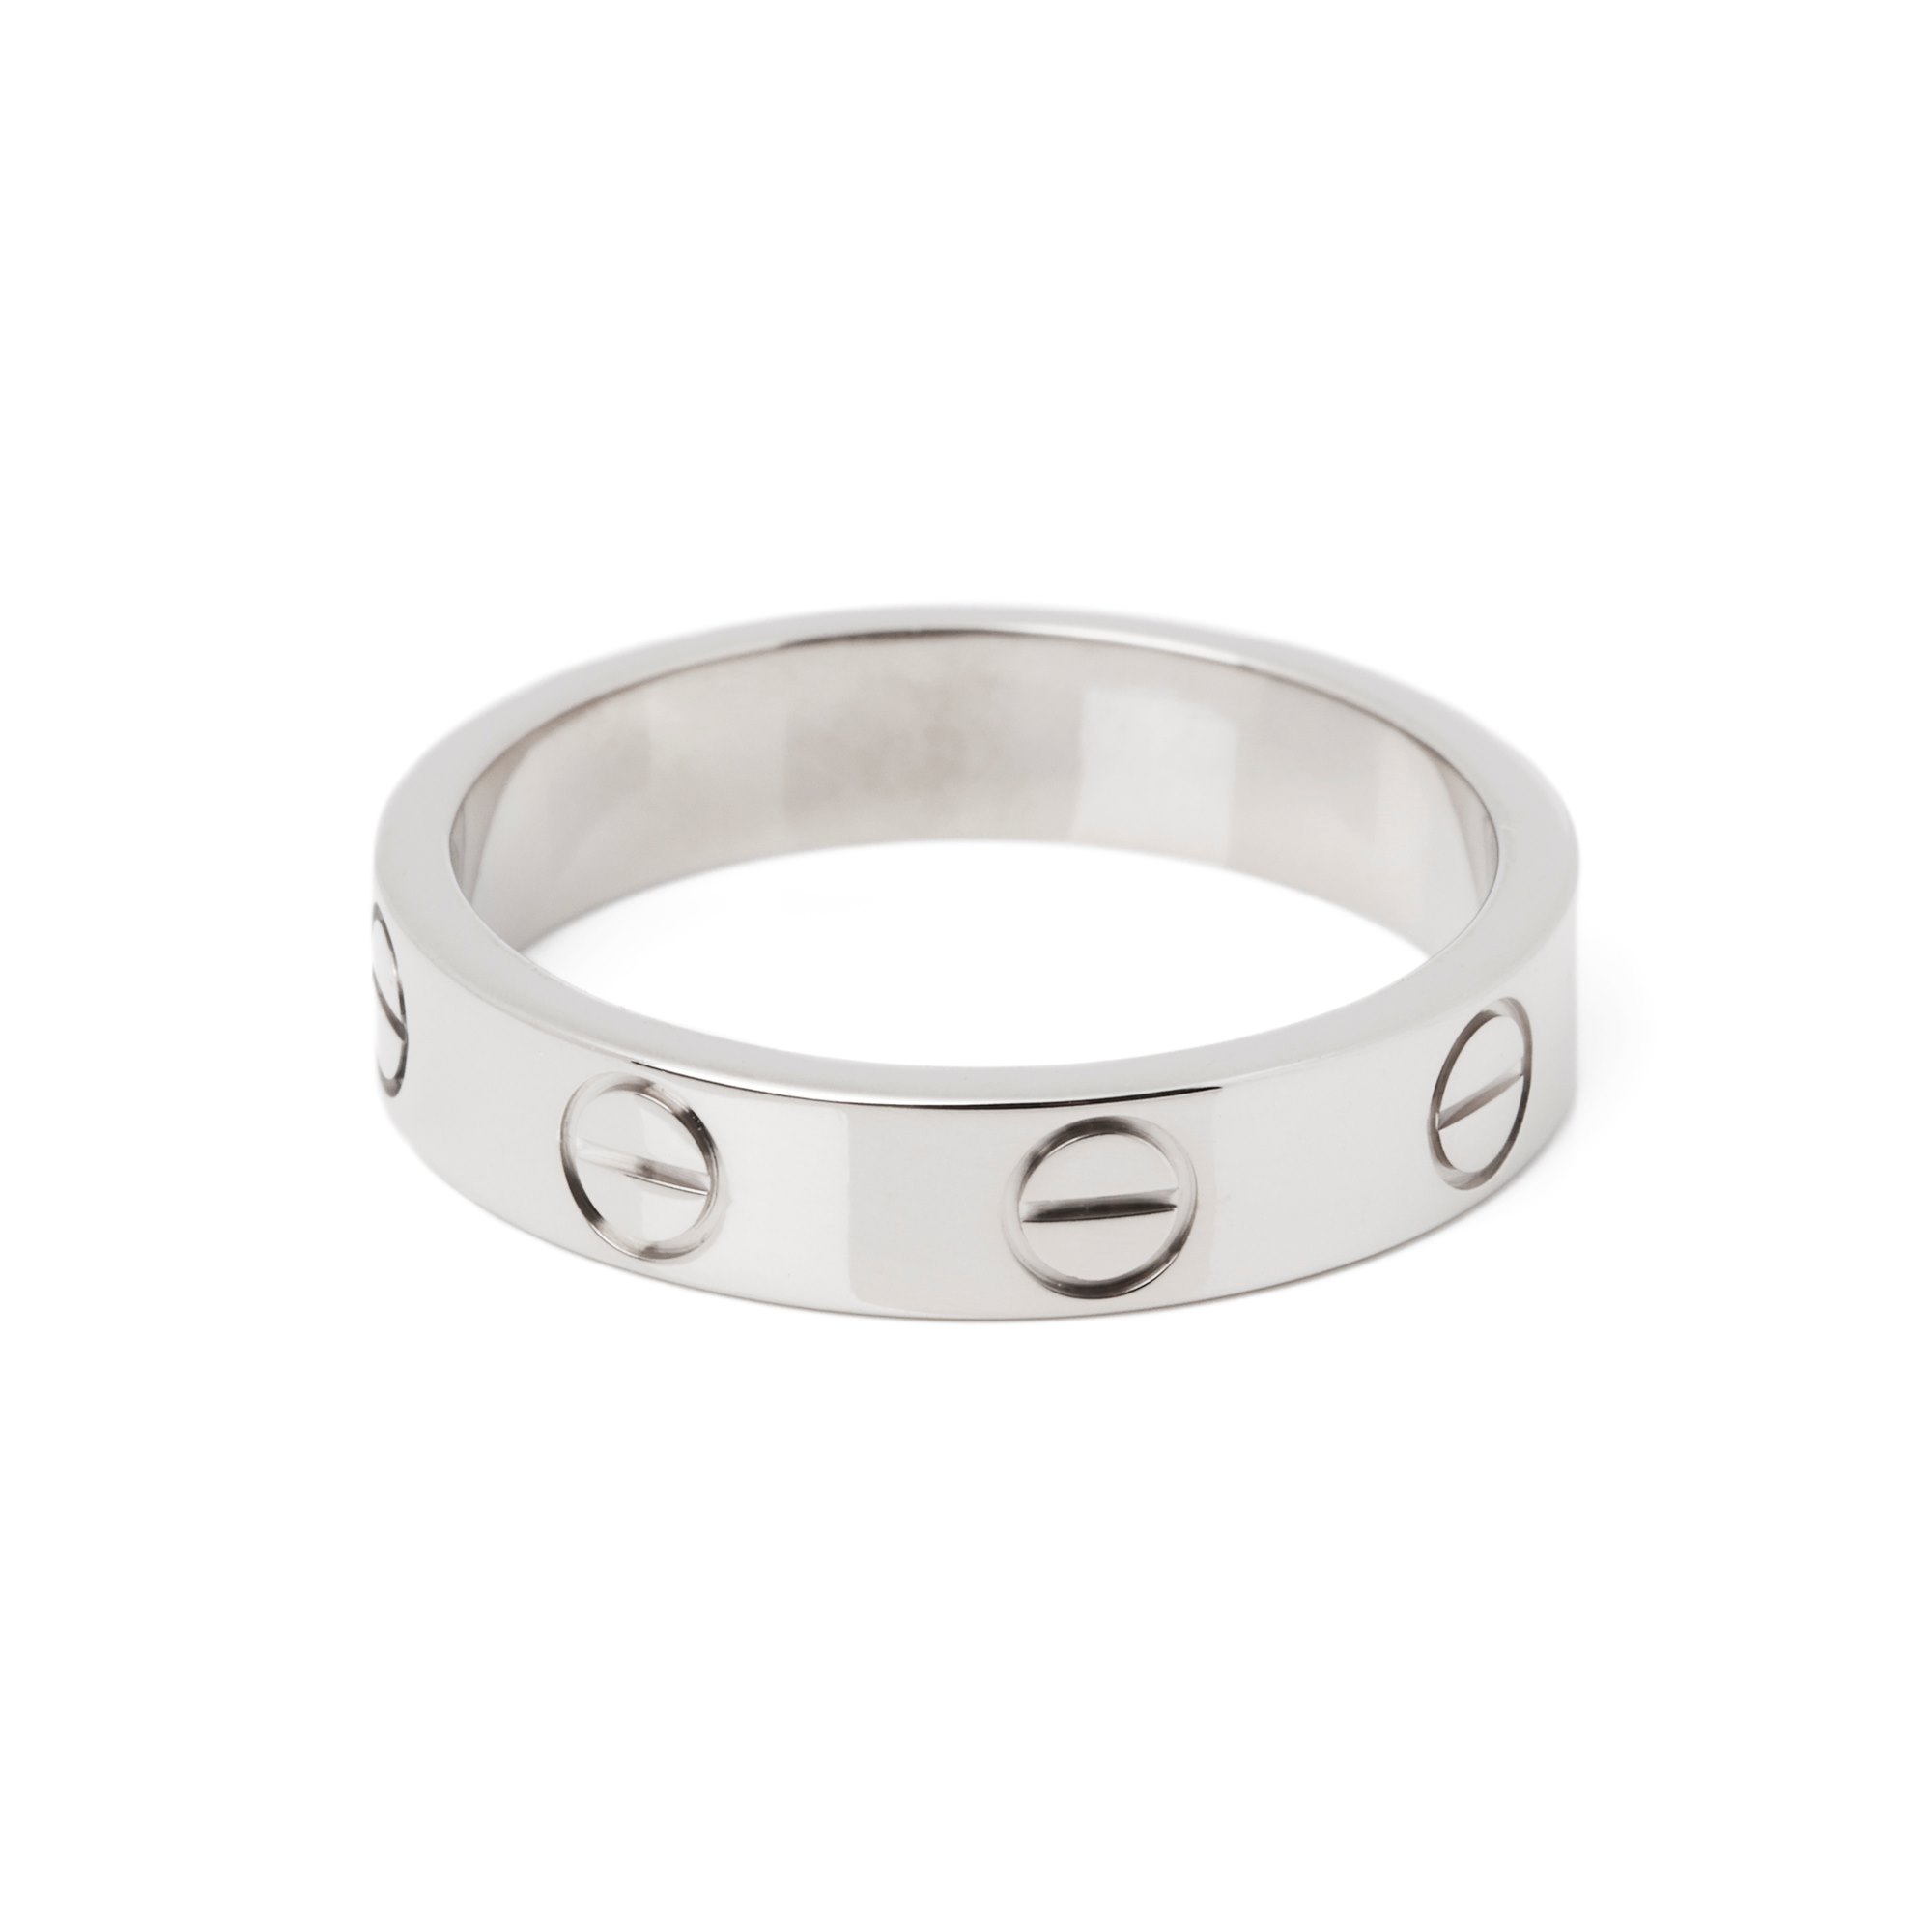 Cartier Love 18ct White Gold Wedding Band